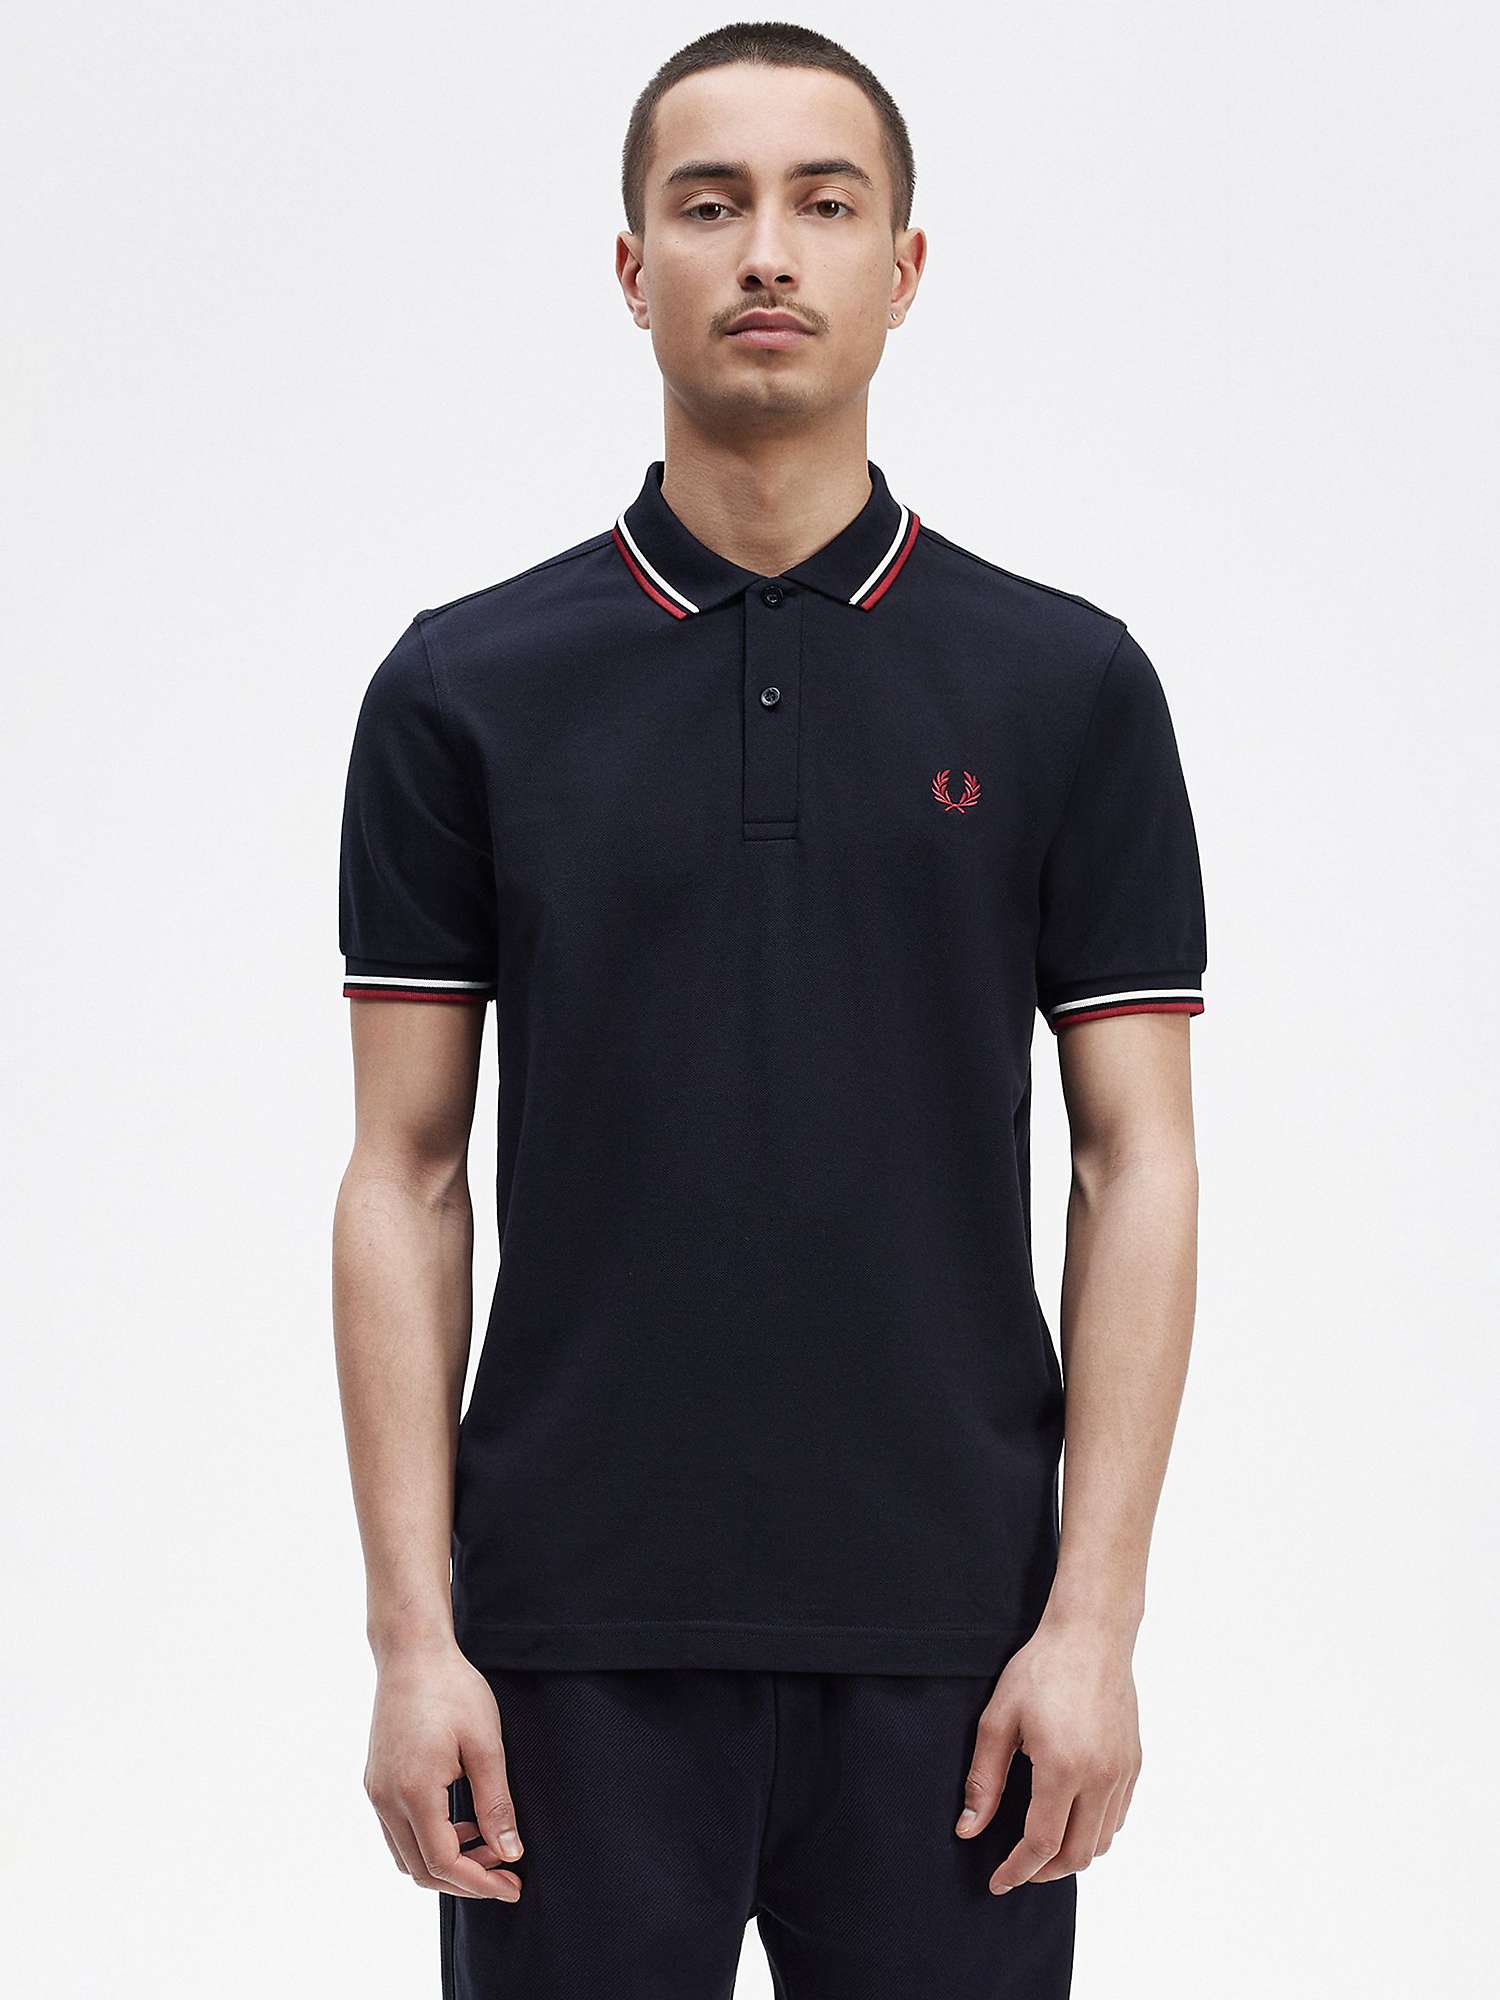 Buy Fred Perry Short Sleeve Polo Shirt, Navy/White/Red Online at johnlewis.com